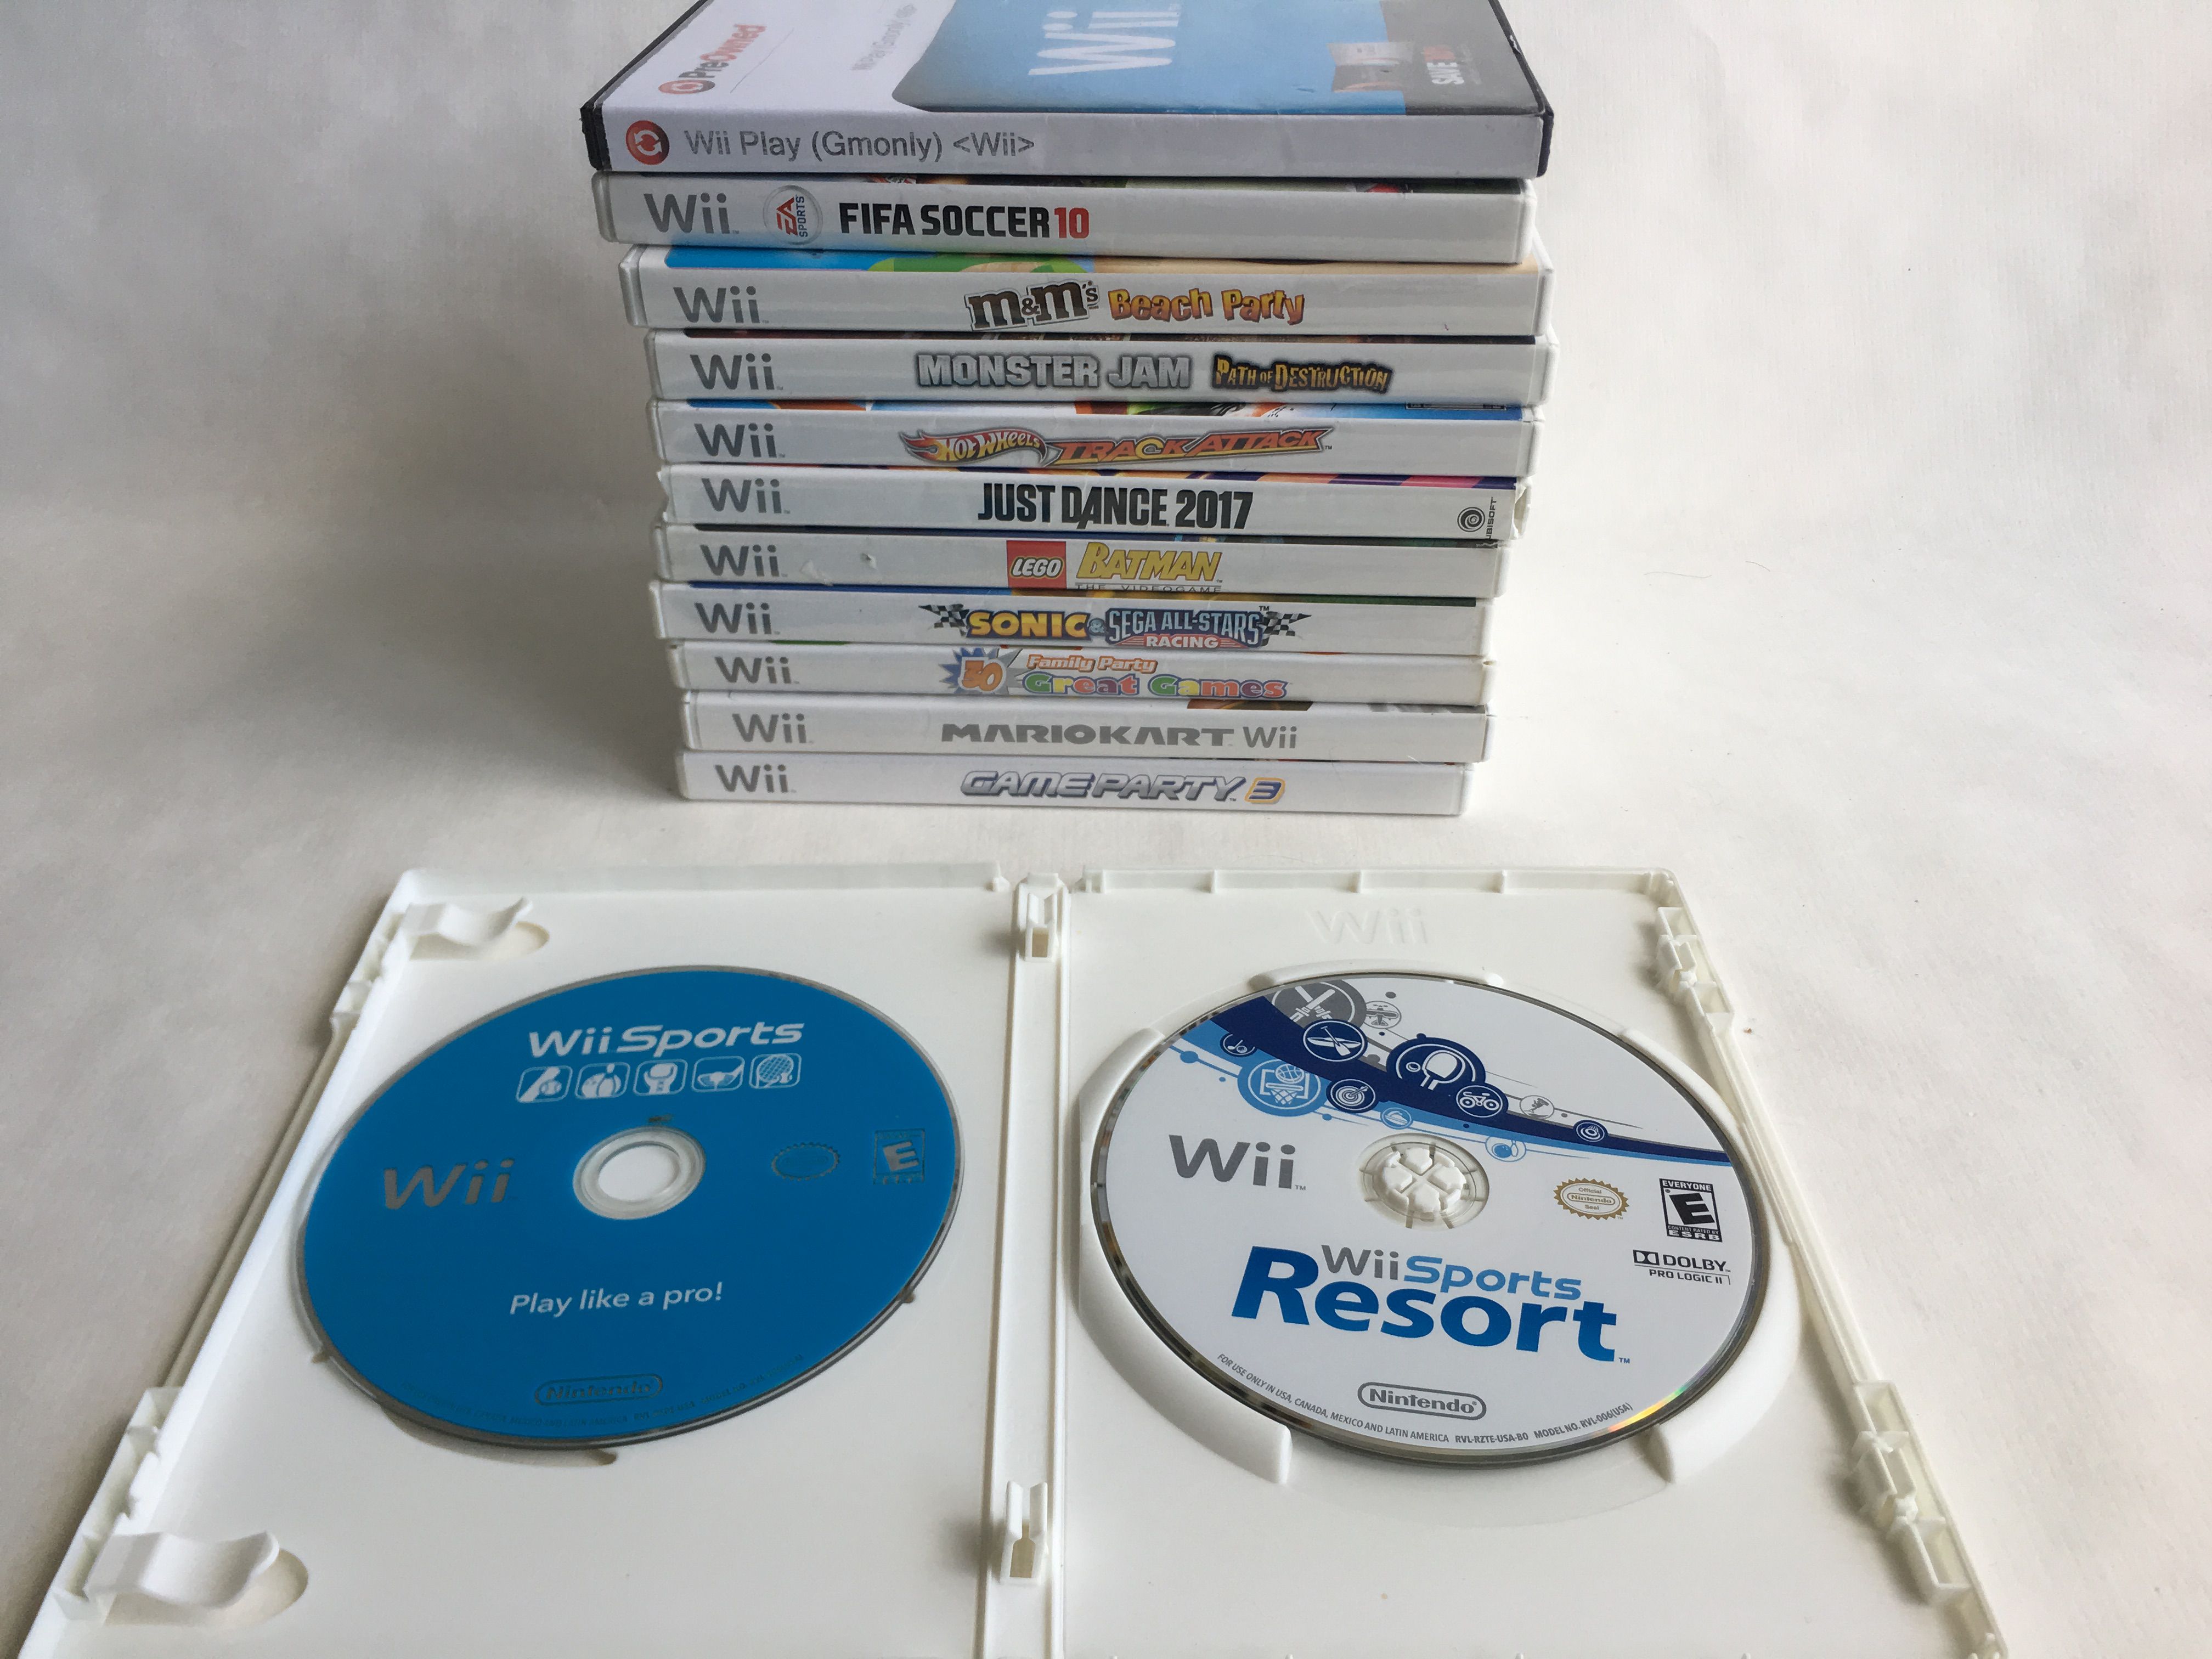 Wii Games - Mario Kart, Wii Sports Resort, Just Dance,PLEASE click "READ MORE" in description for full list of games